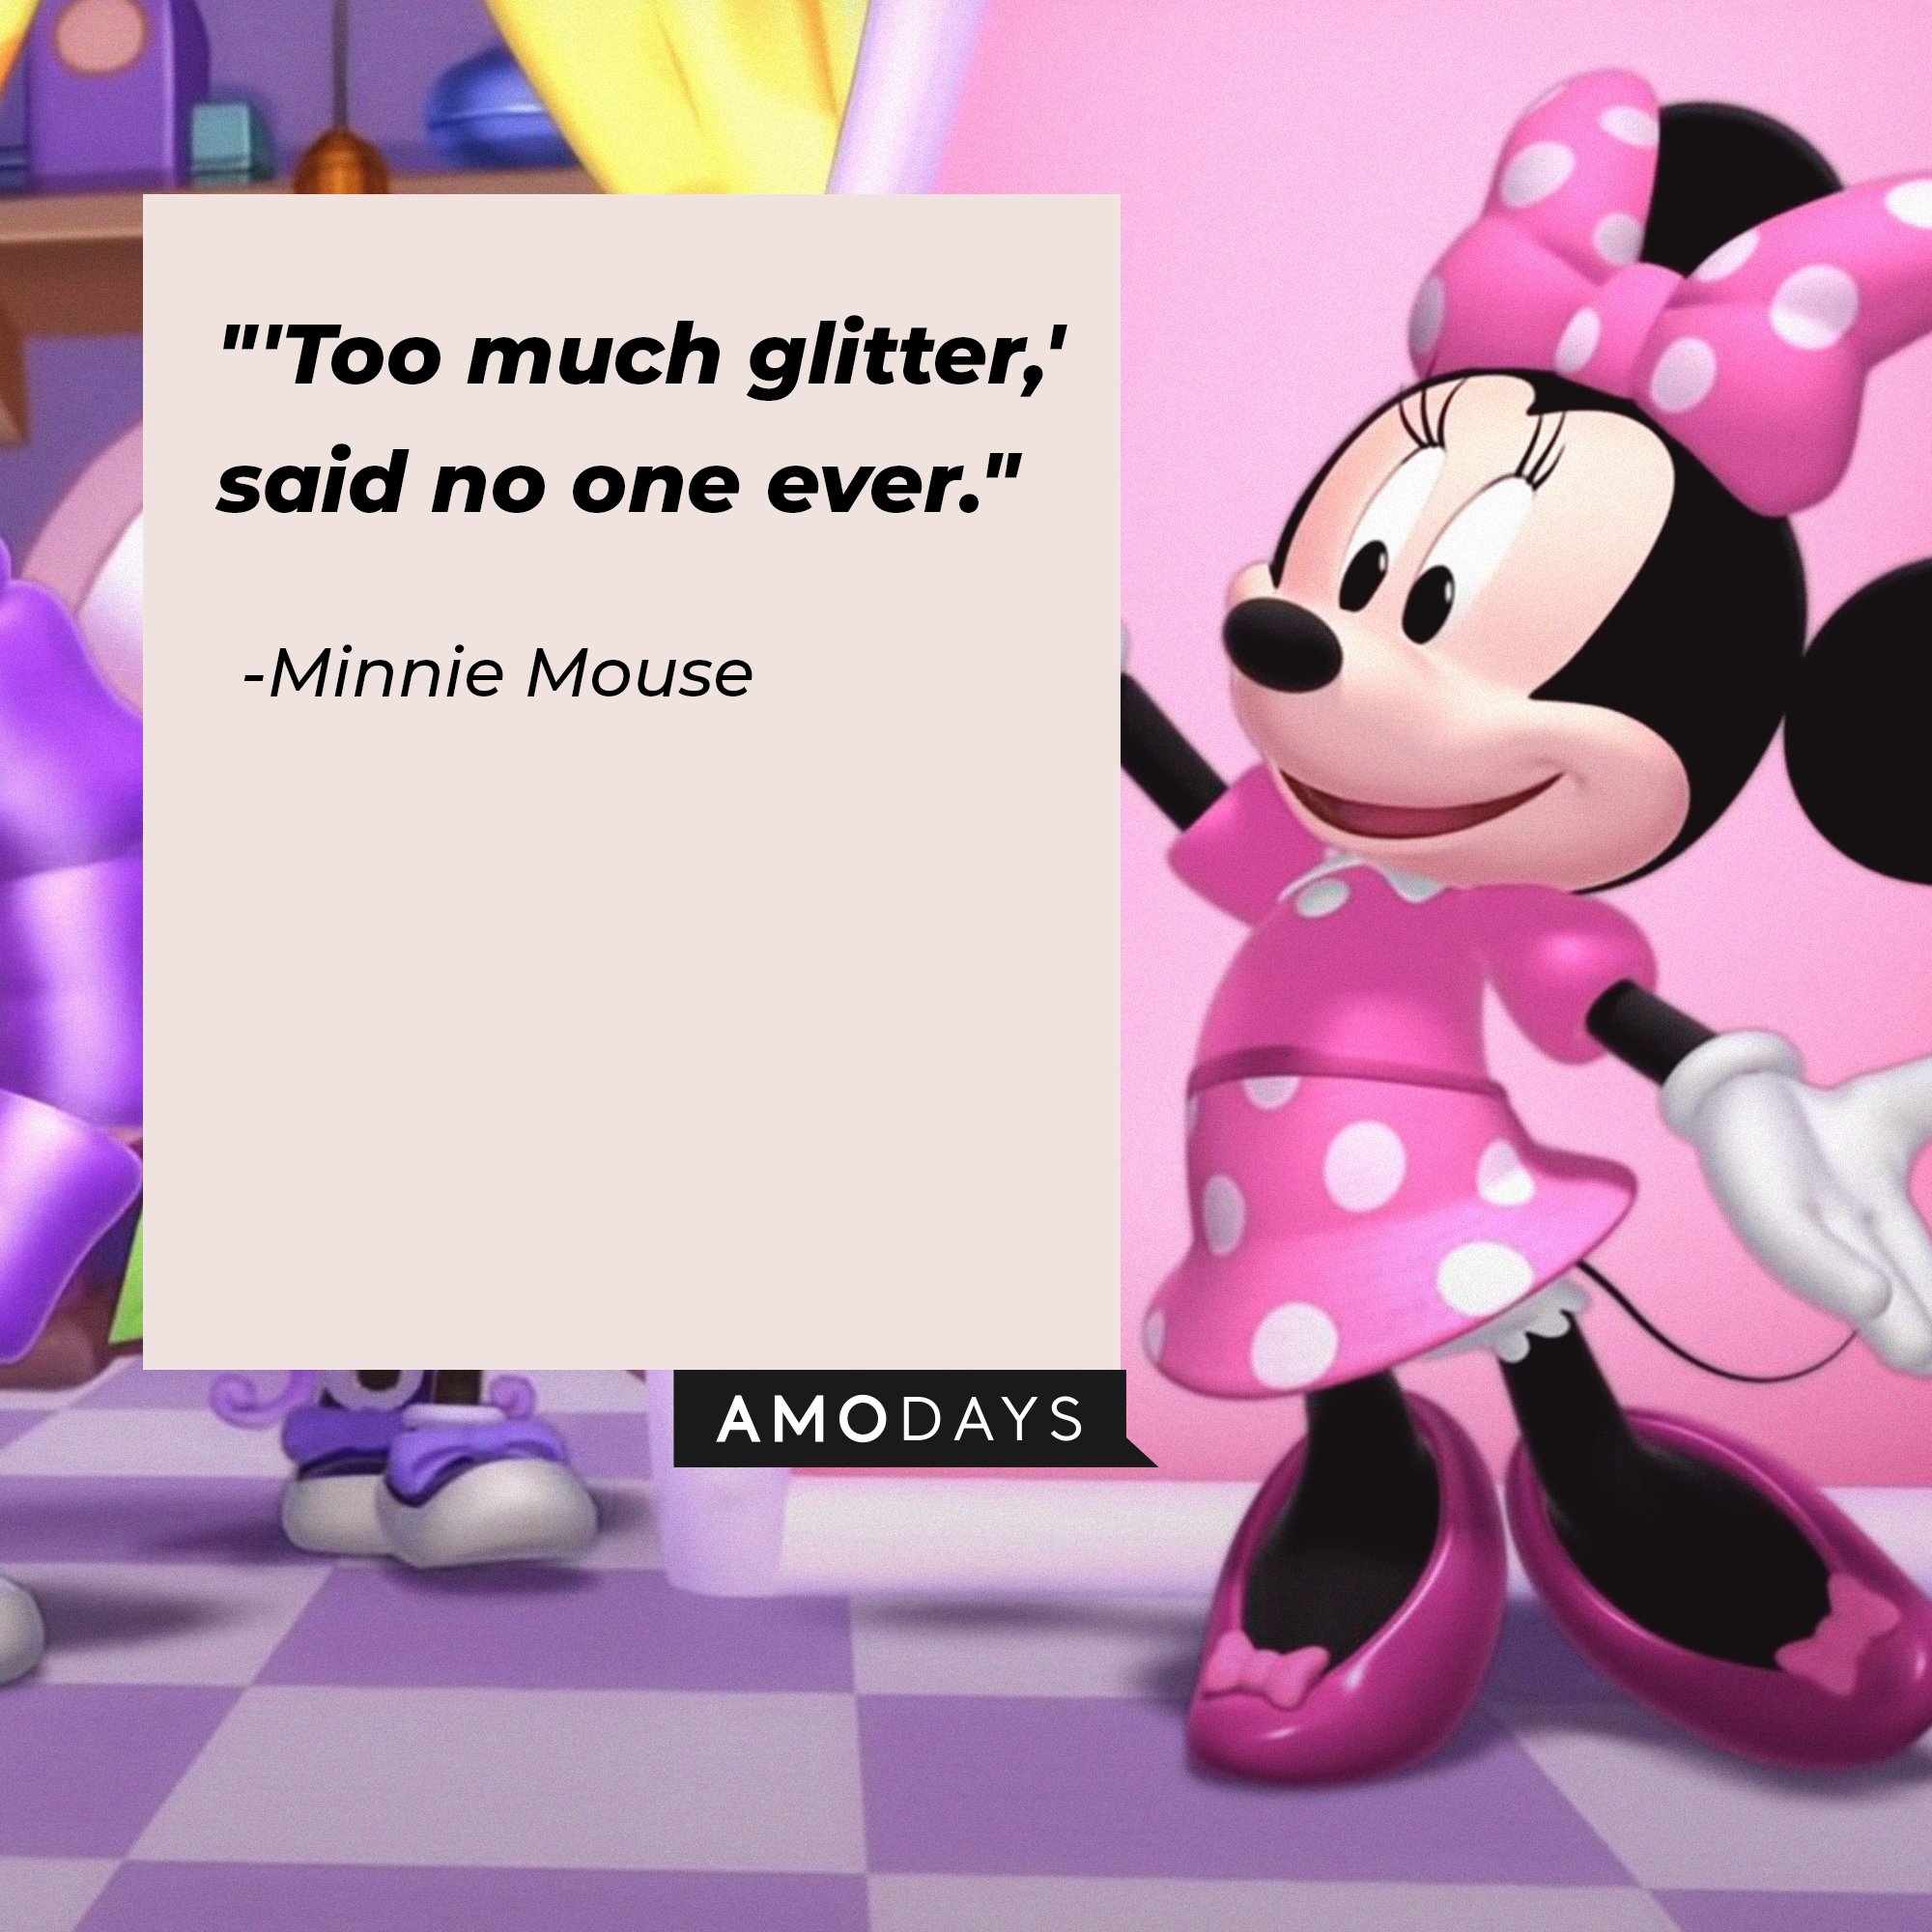 Minnie Mouse’s quote: "'Too much glitter,' said no one ever." | Image: AmoDays